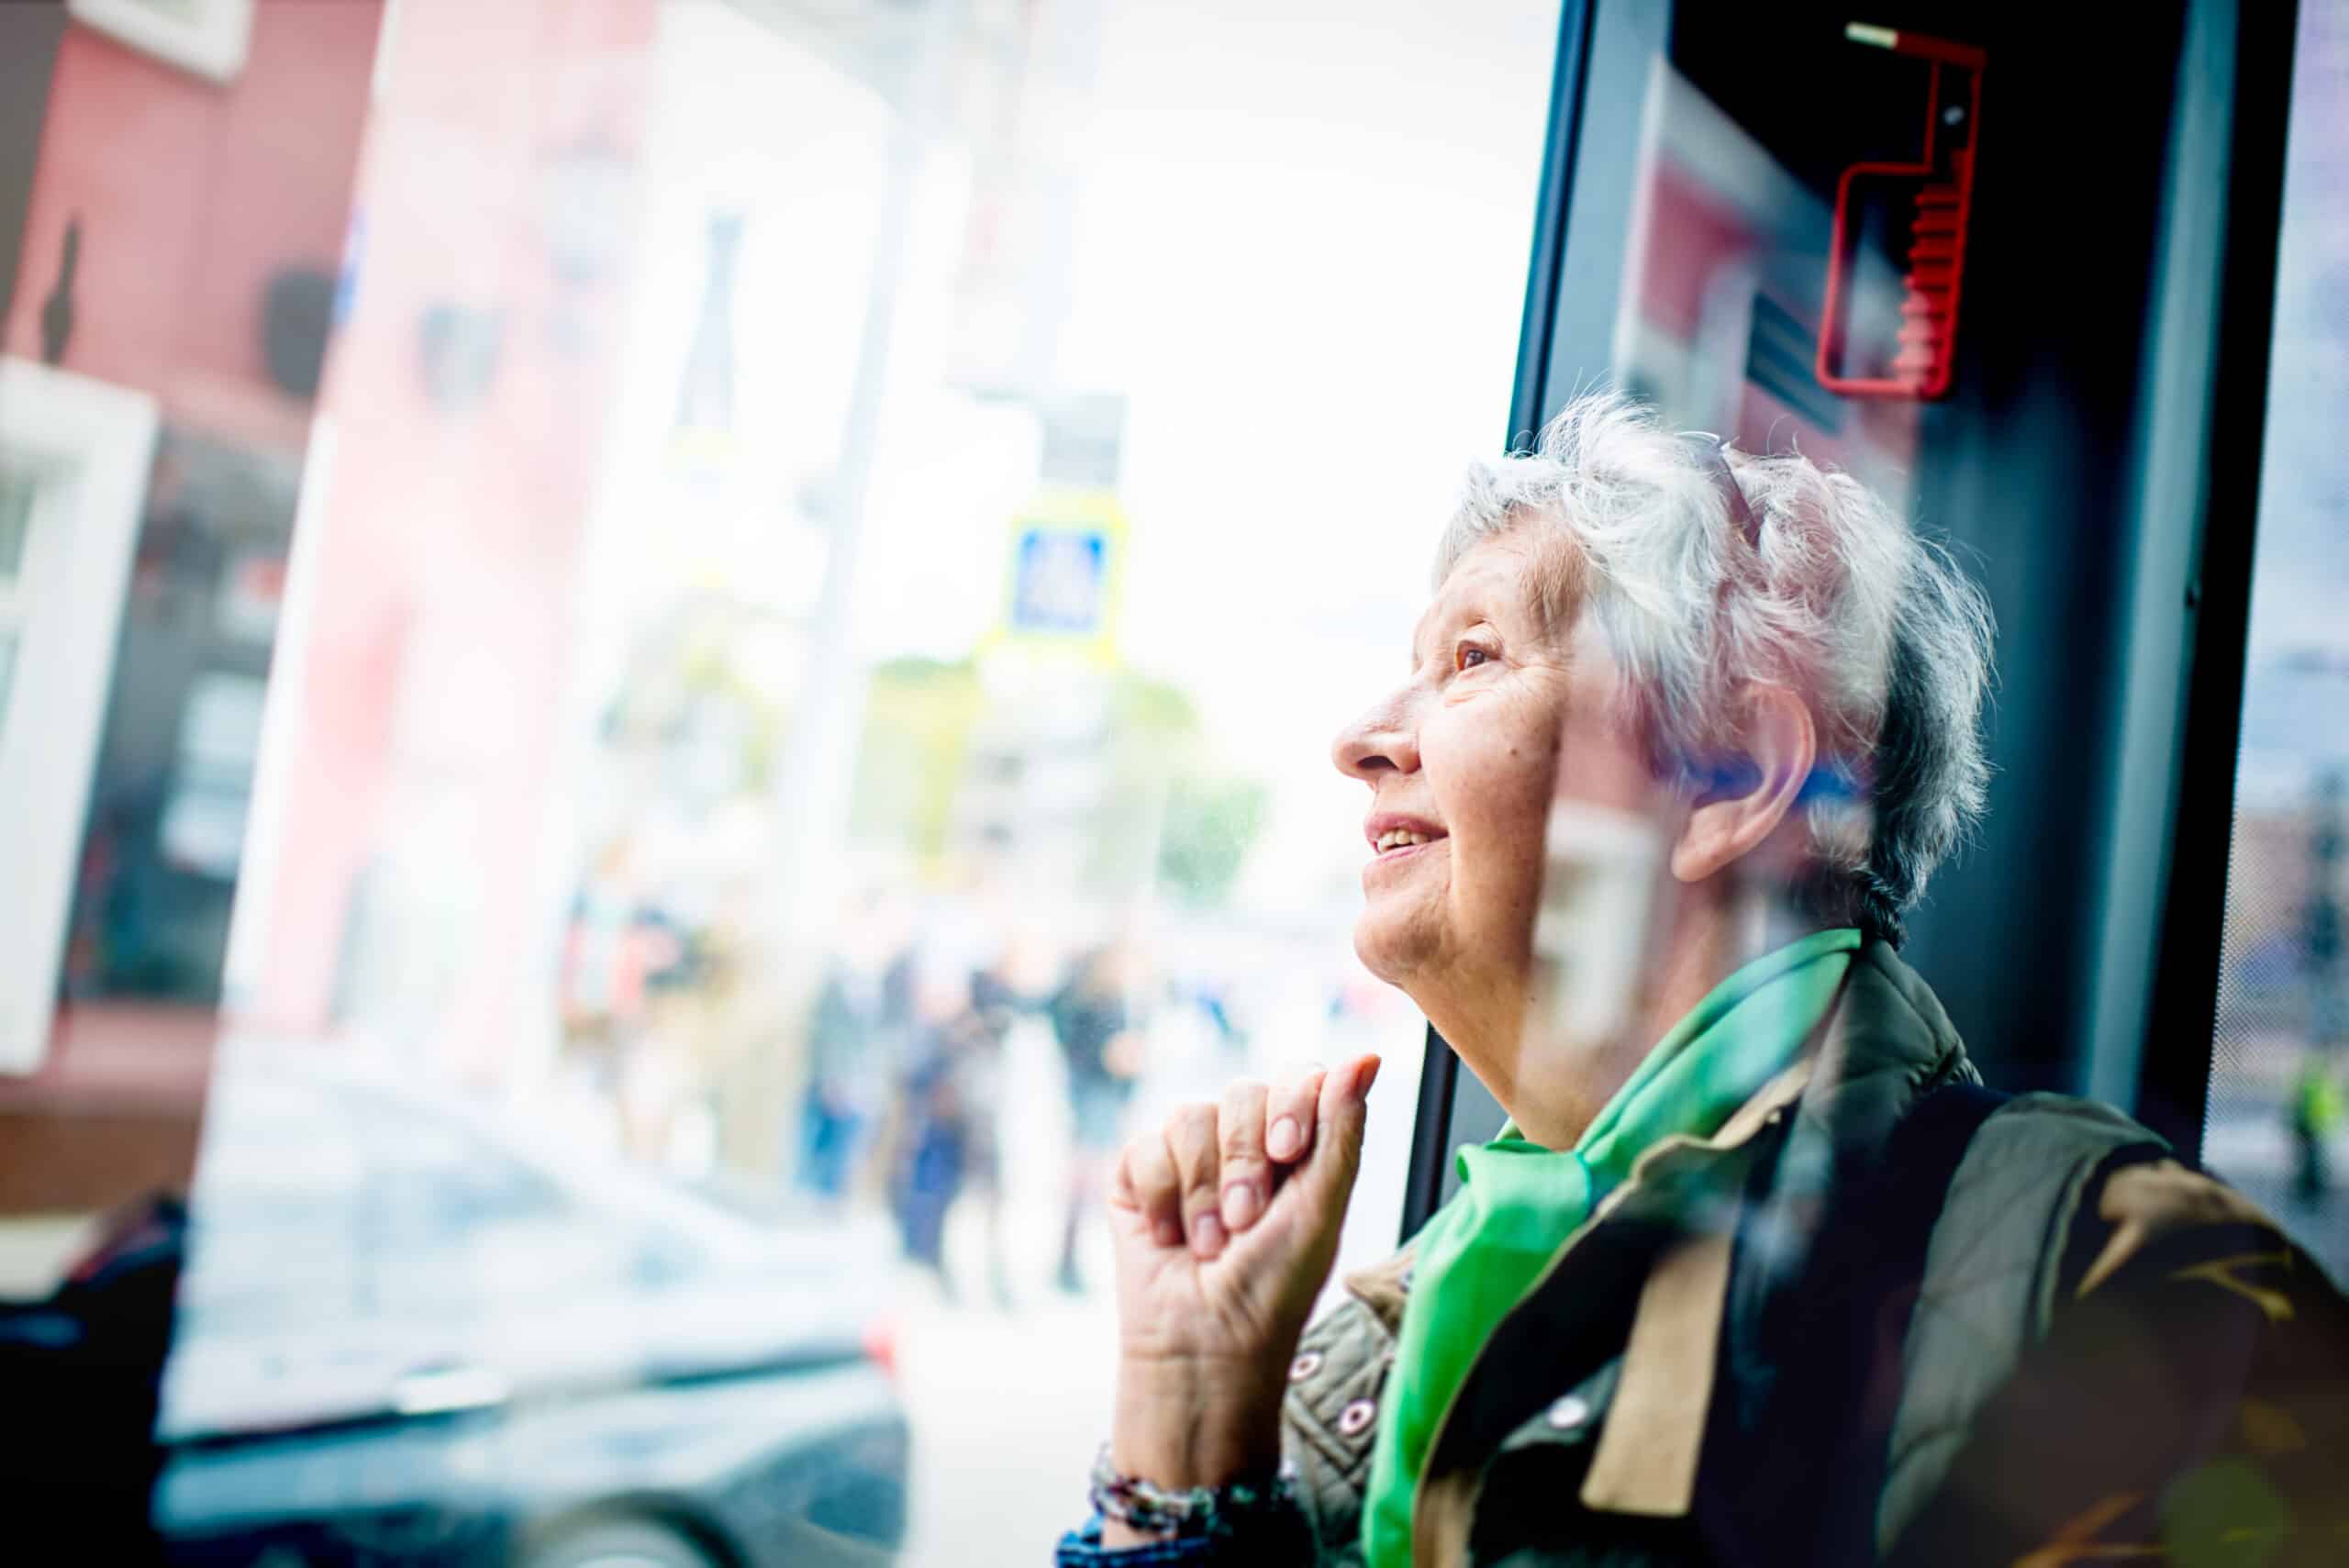 Senior woman sitting on a bus looking out of the window smiling